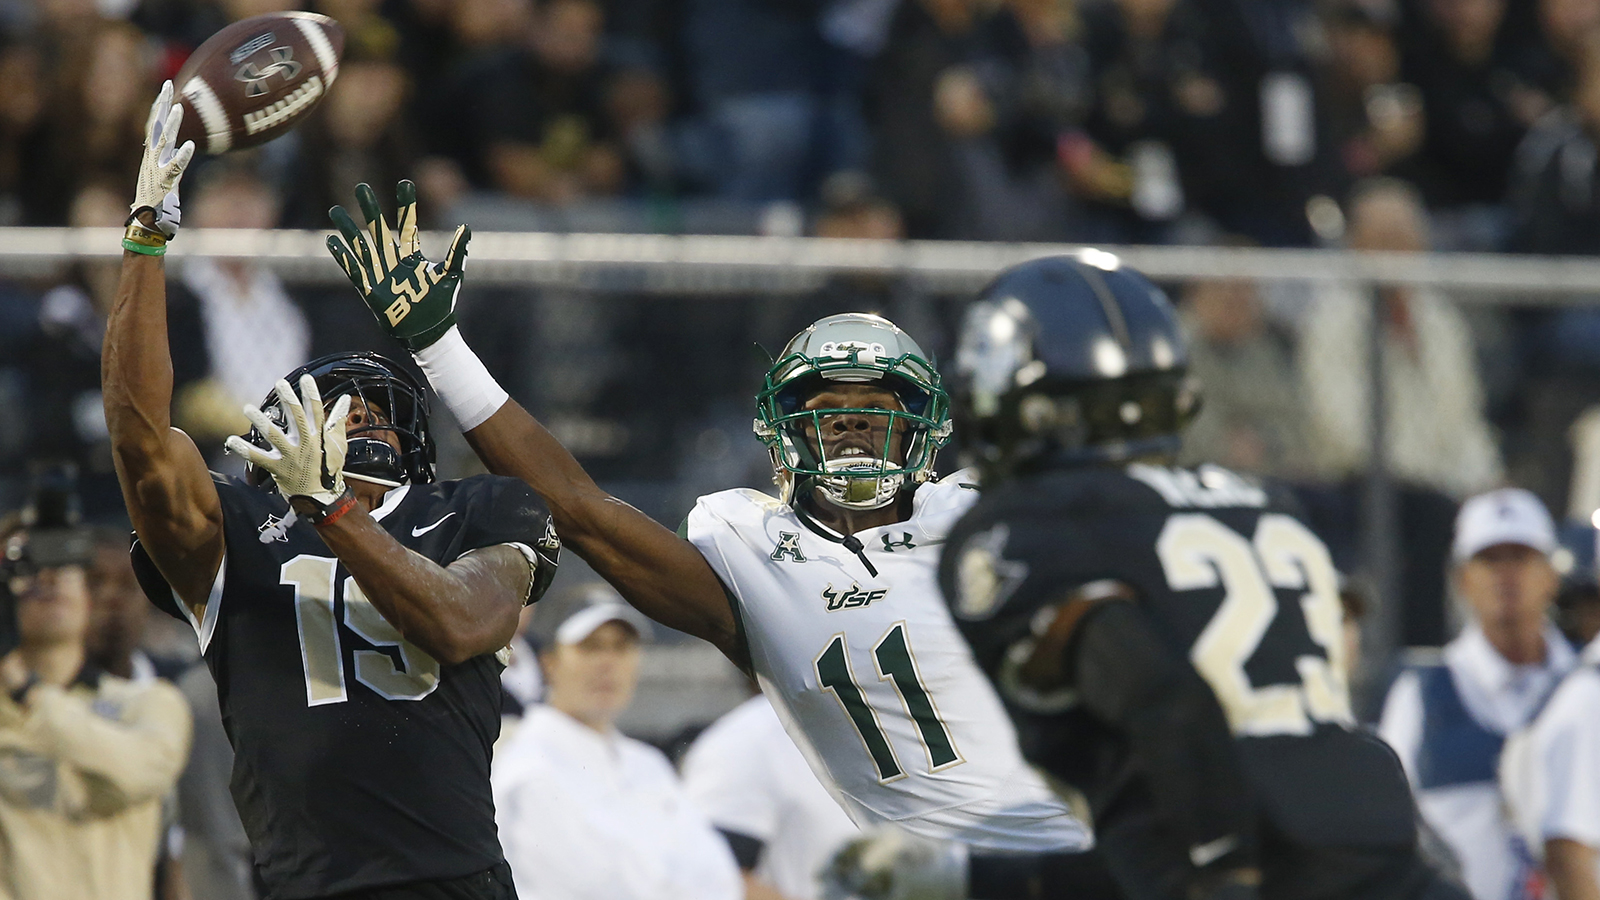 UCF tops USF in thrilling War on I-4 to finish a perfect regular season